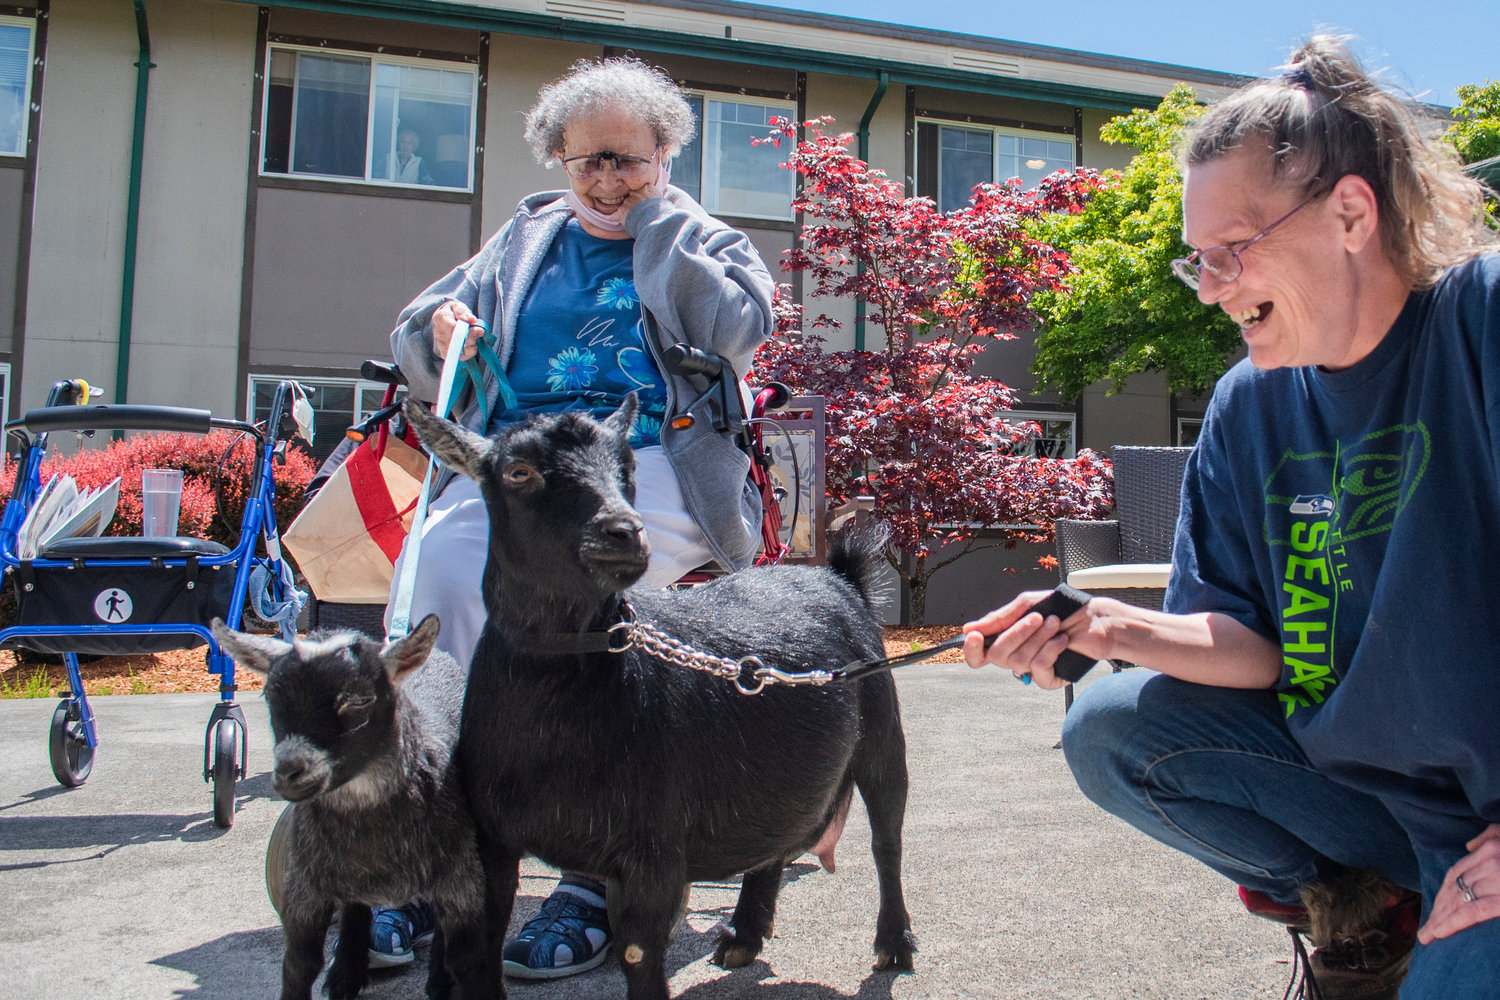 Grace Stratton and Sundina Bryan smile while holding pygmy goats by the lead at Woodland Village Concepts of Chehalis Thursday afternoon.